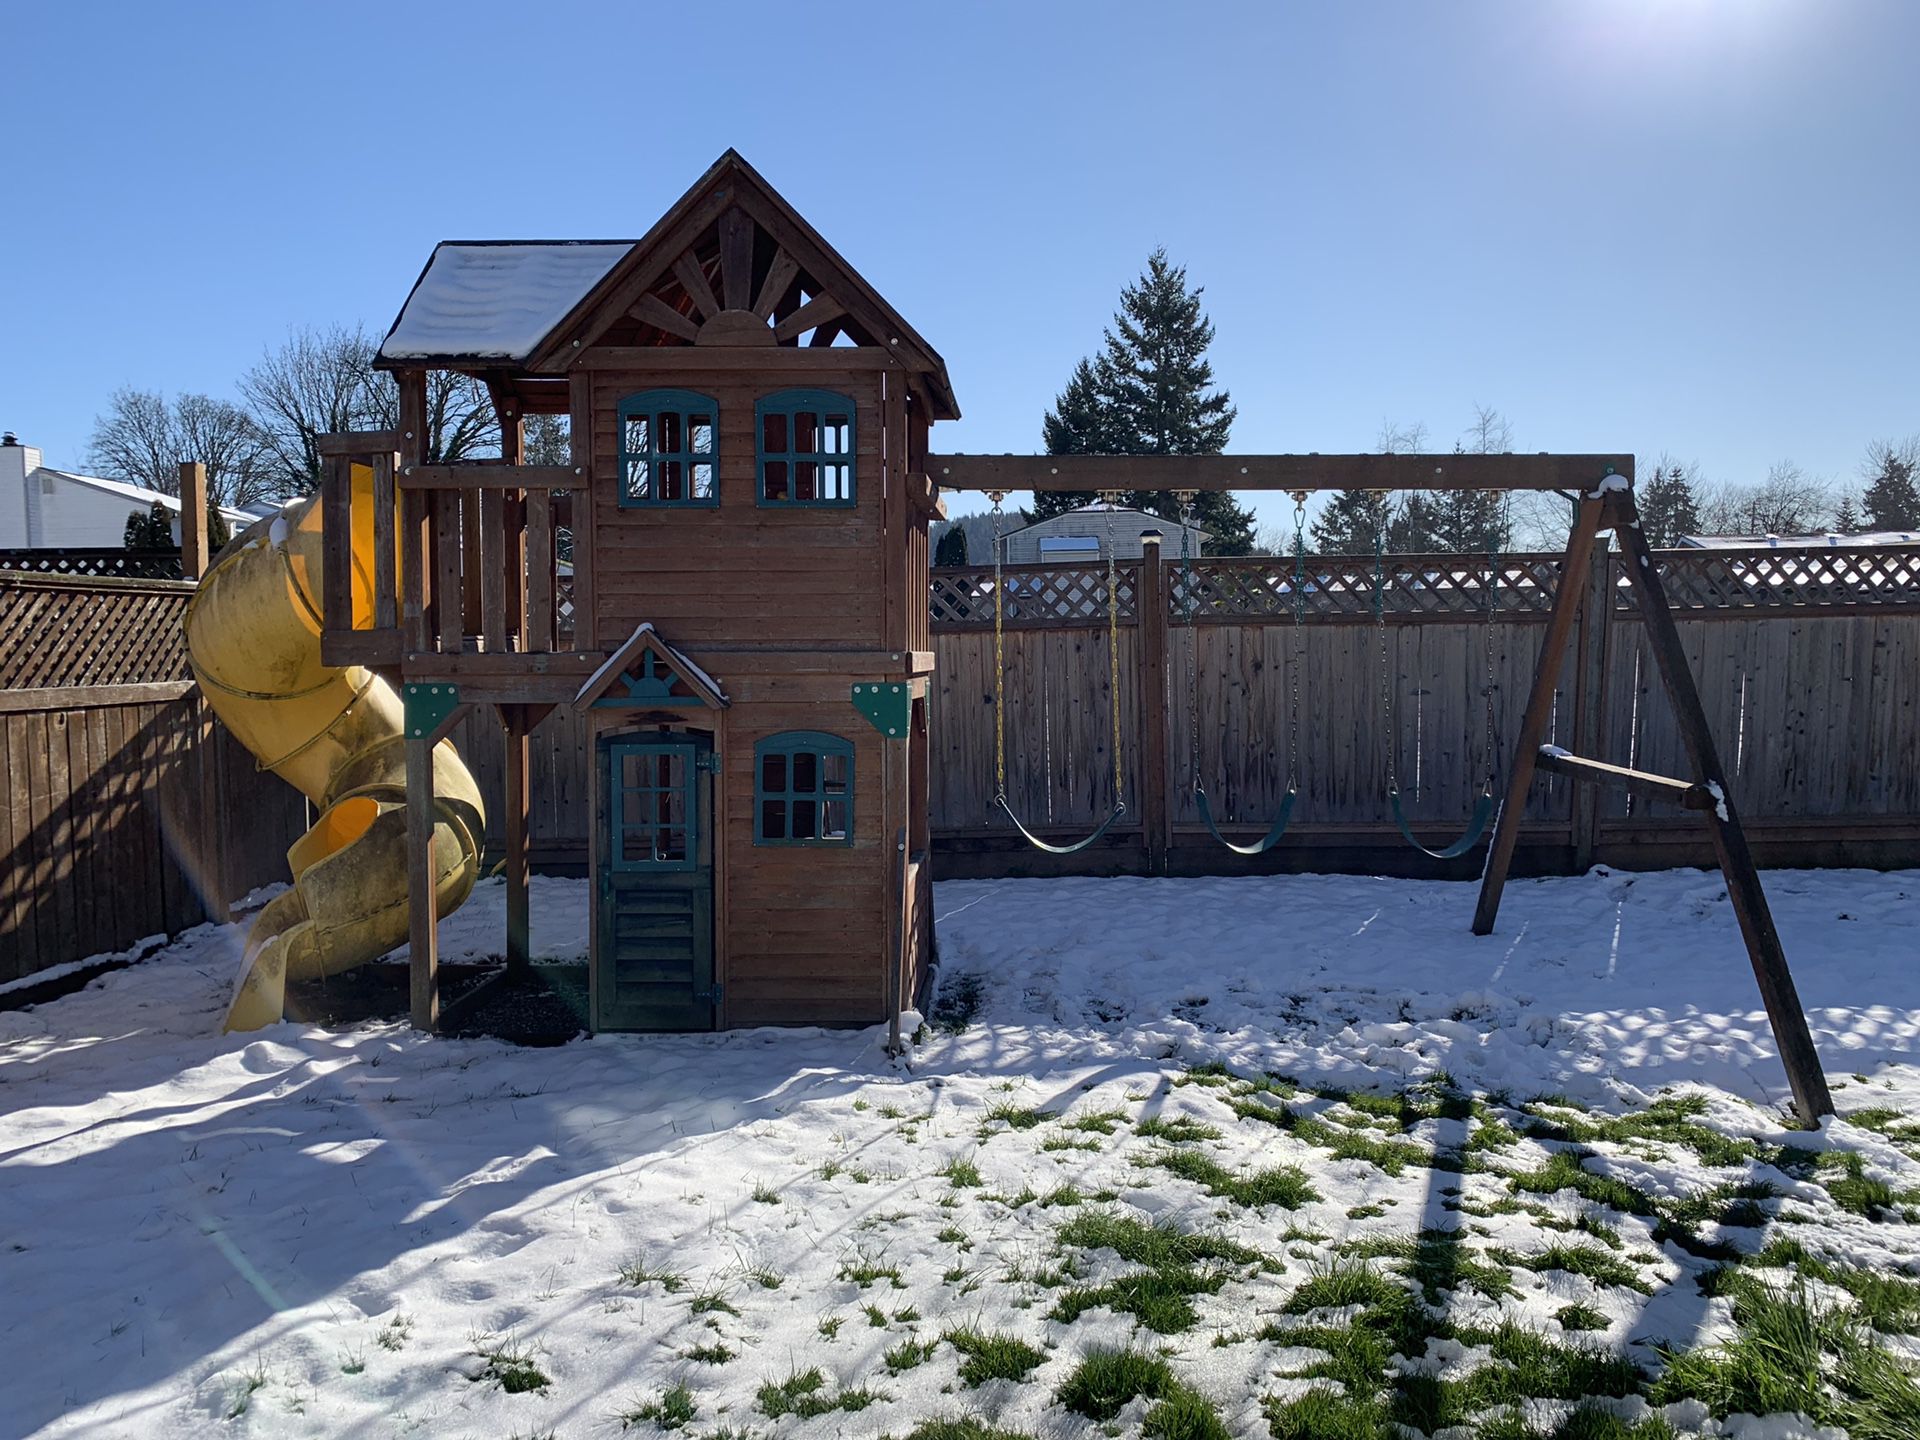 Outside swing set/playhouse with slide